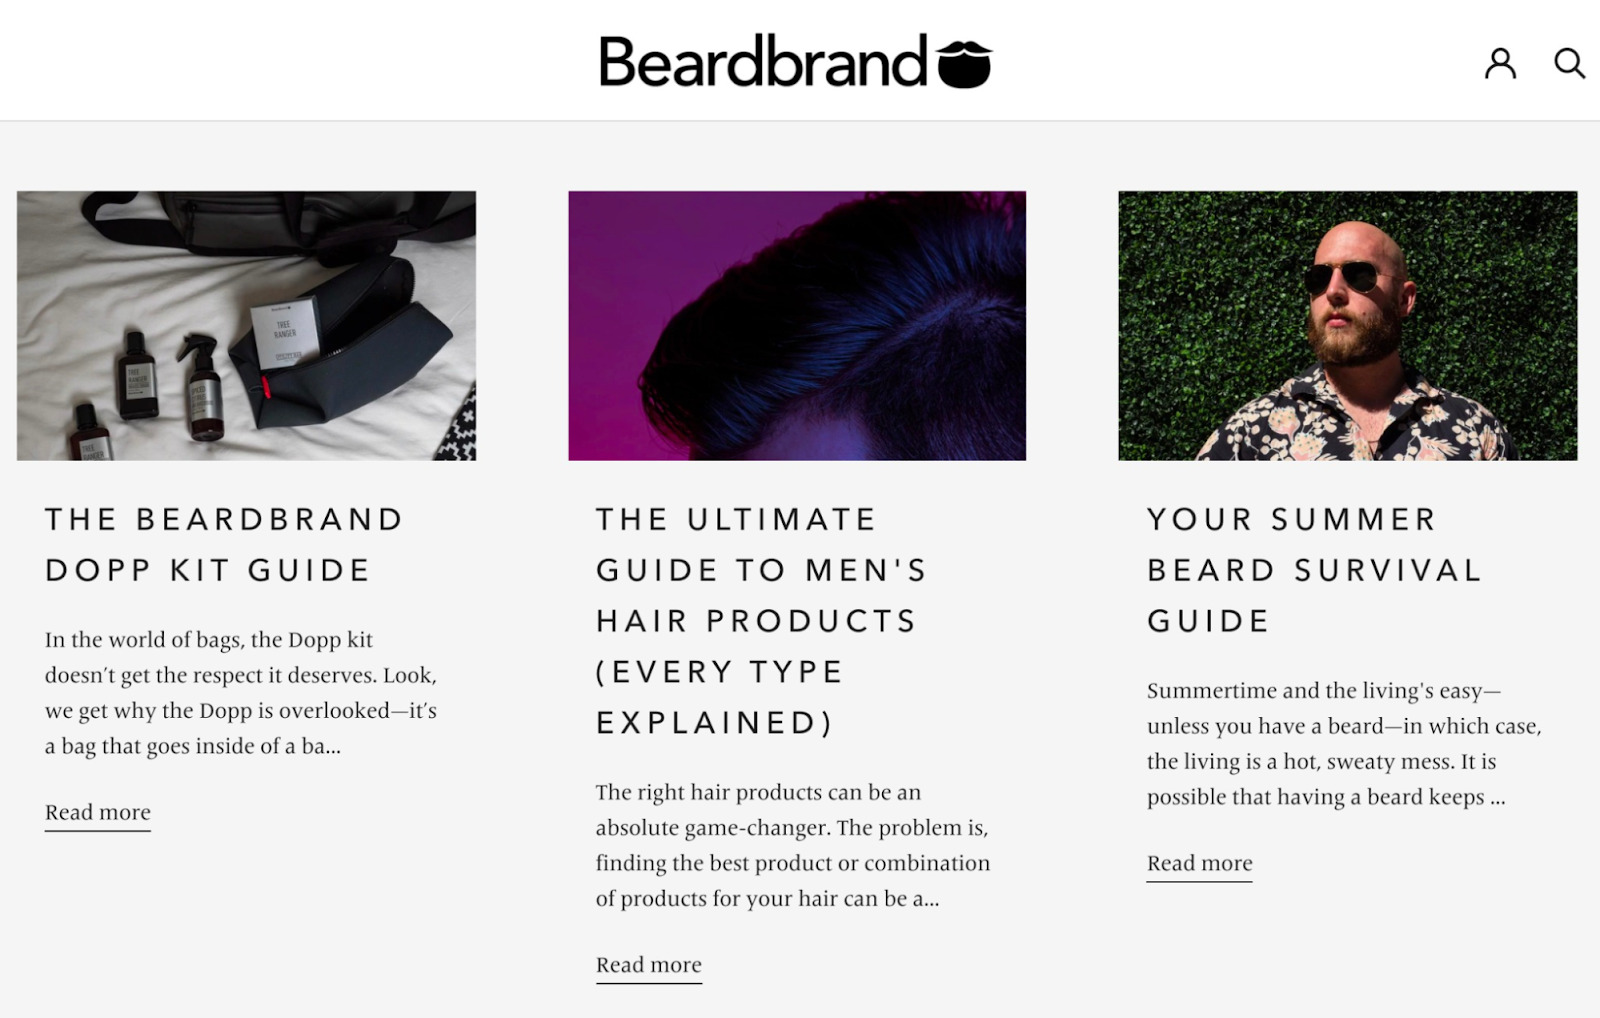 Beardbrand's content about taking care of beards 